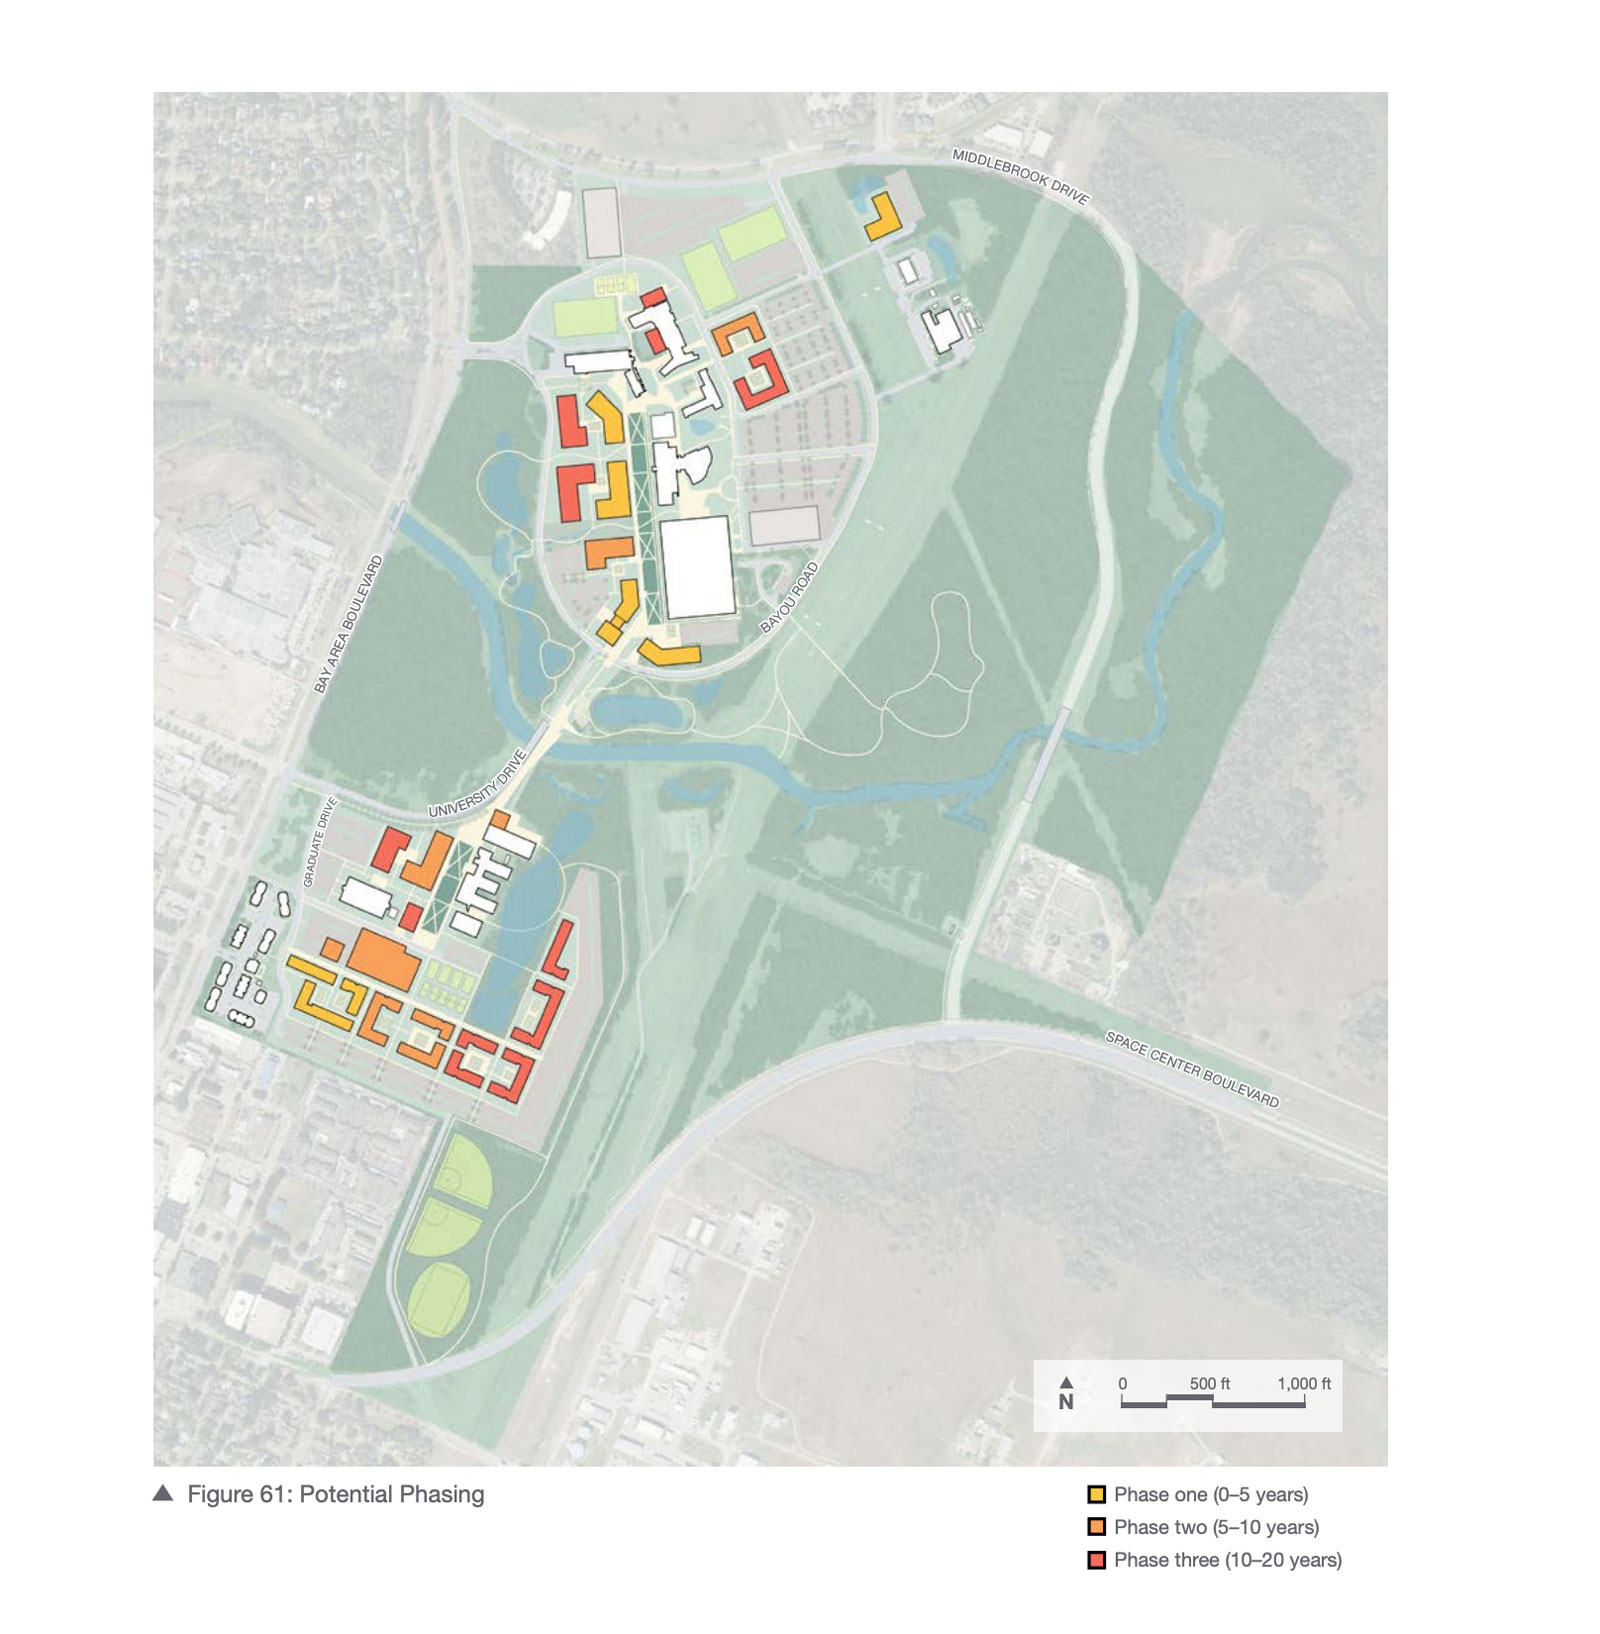 An illustration that shows an overview of where phases proposed for North and South Mall areas as well as the Bayou Crossing are to take place.